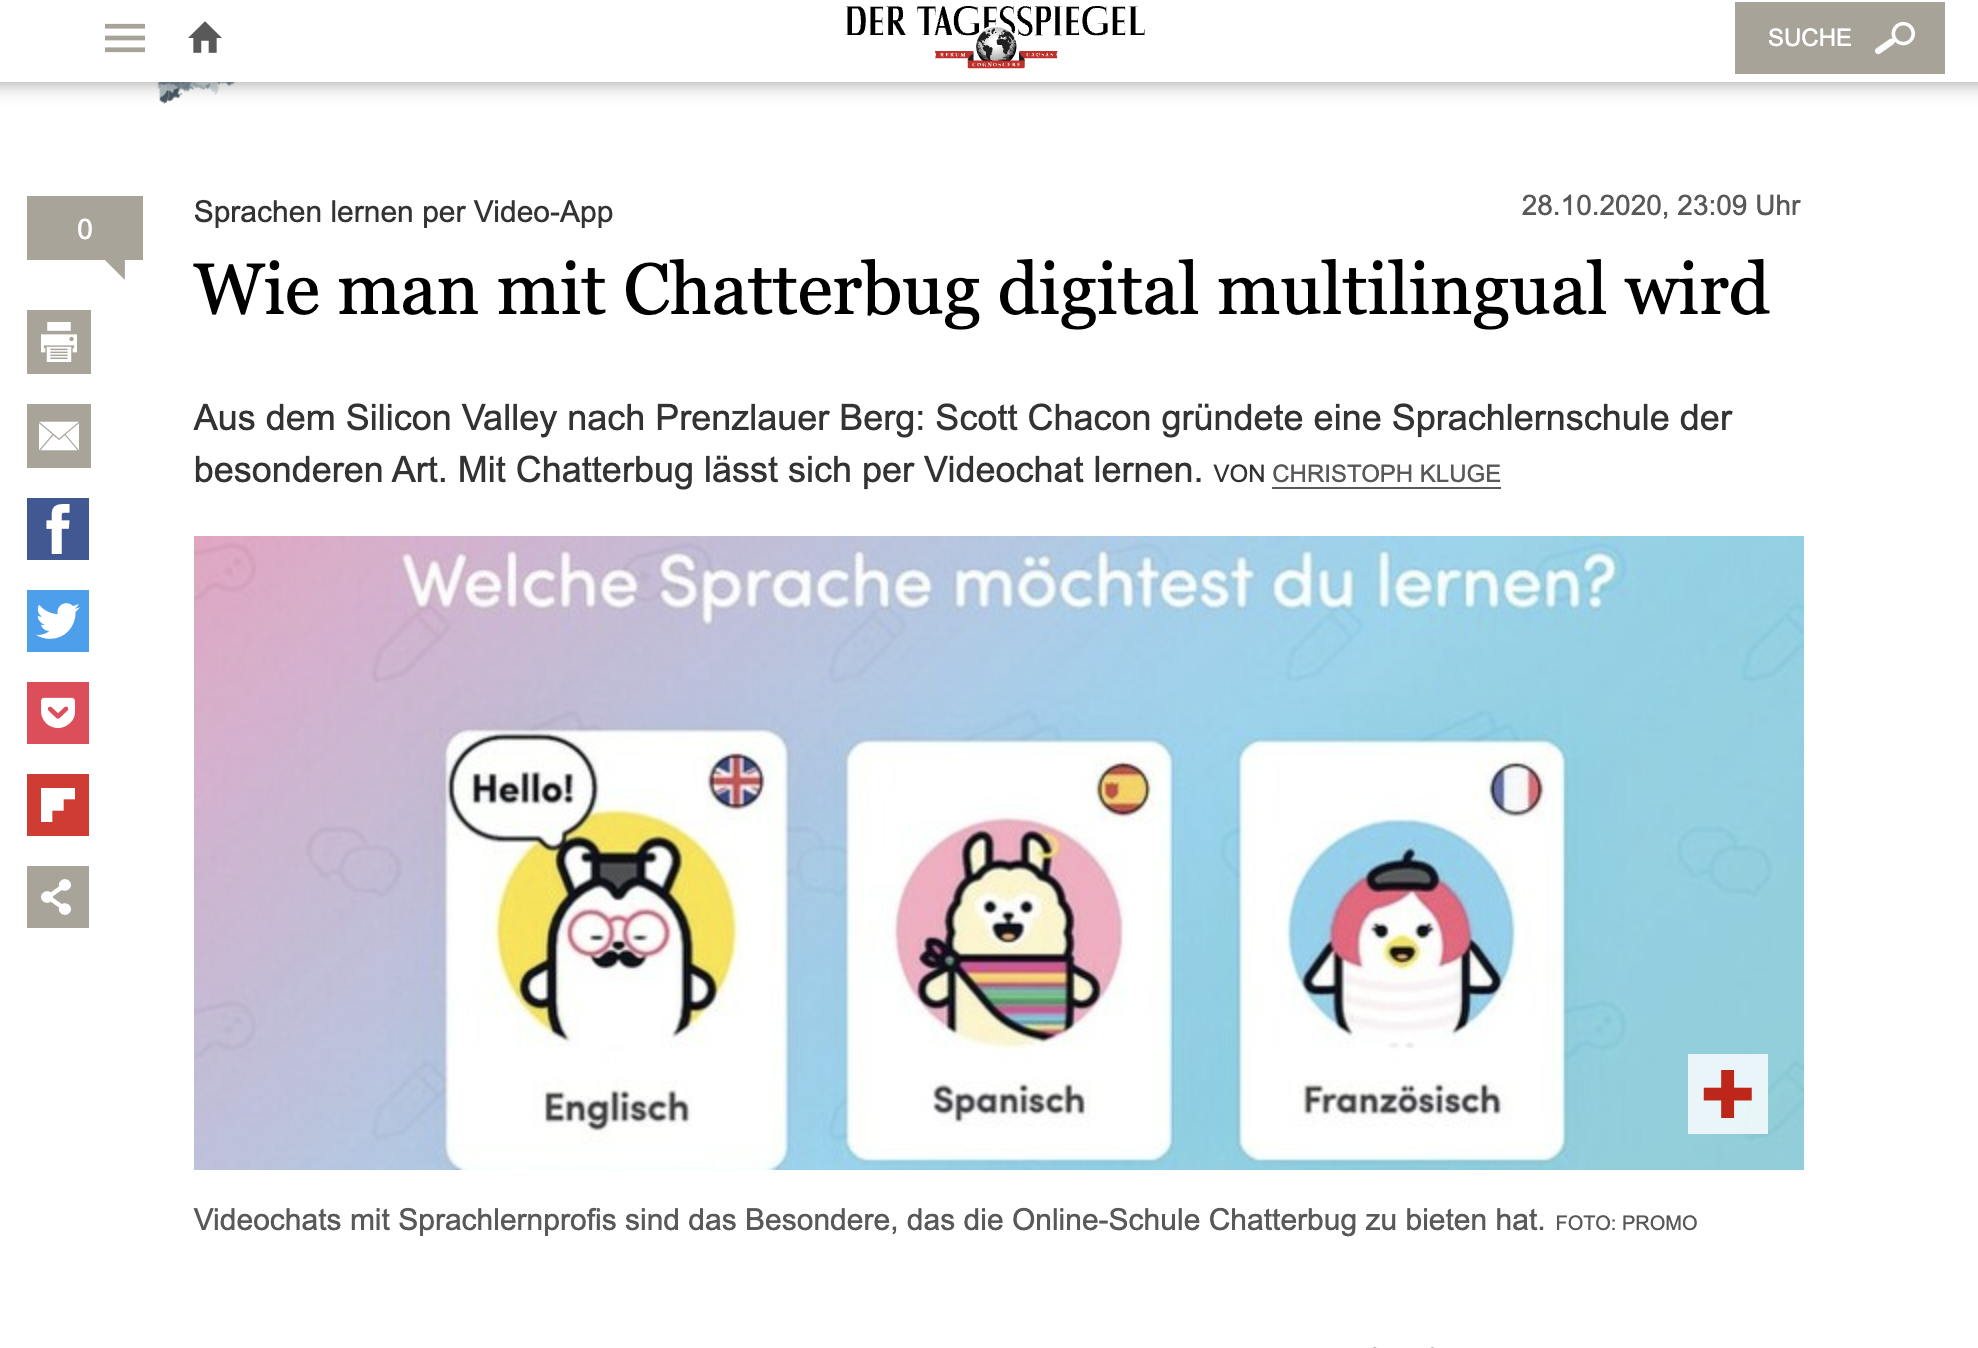 chatterbug_tagesspiegel_2021.png